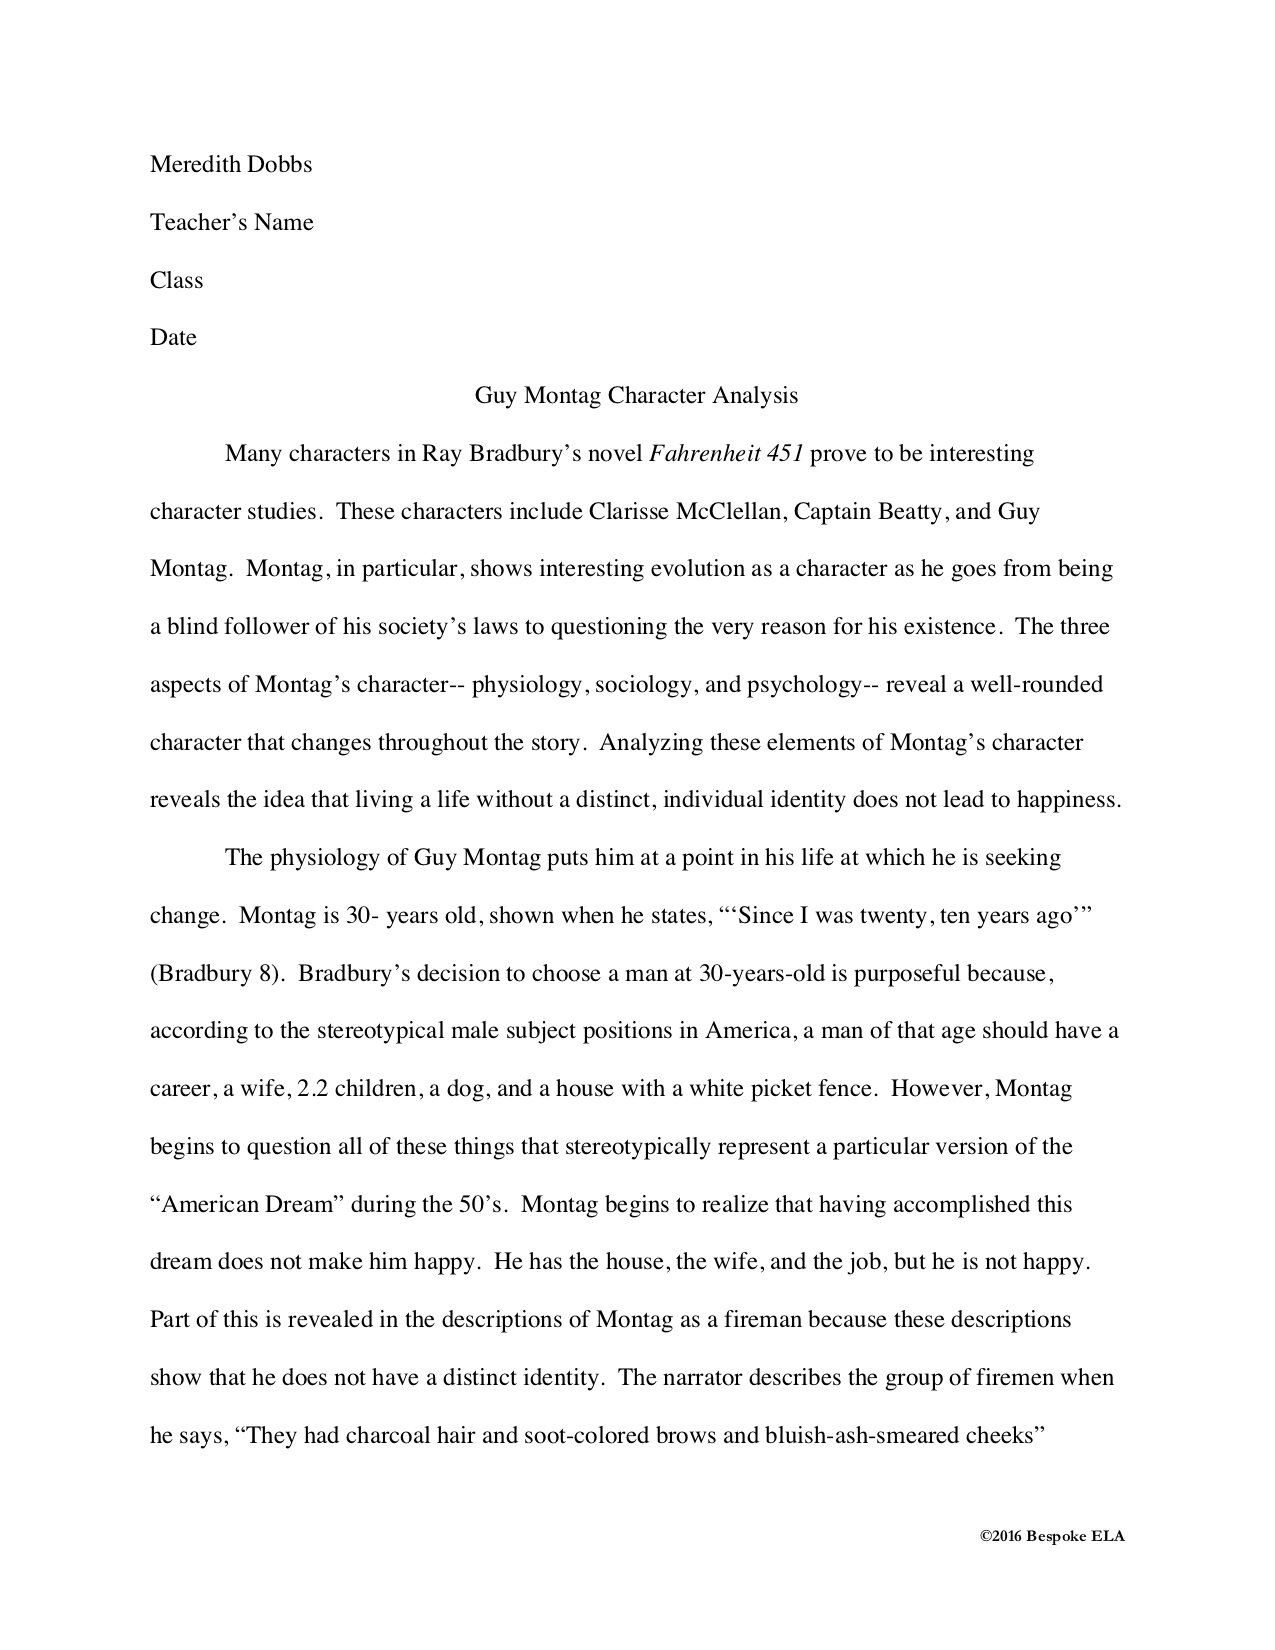 How to Sequence a Literary Analysis Essay Unit — Bespoke ELA